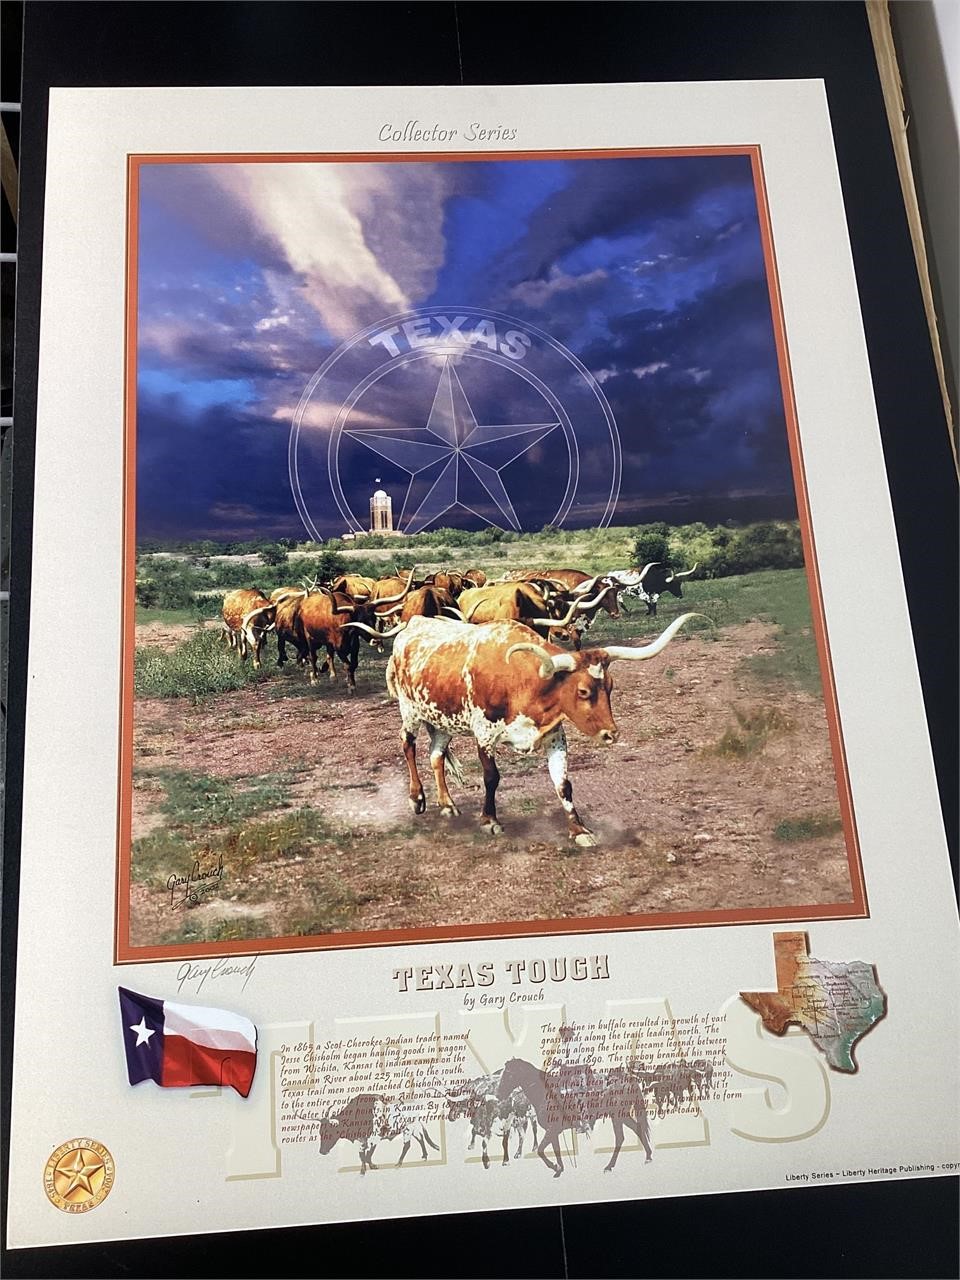 Gary Crouch "Texas Tough" 24X18 Signed